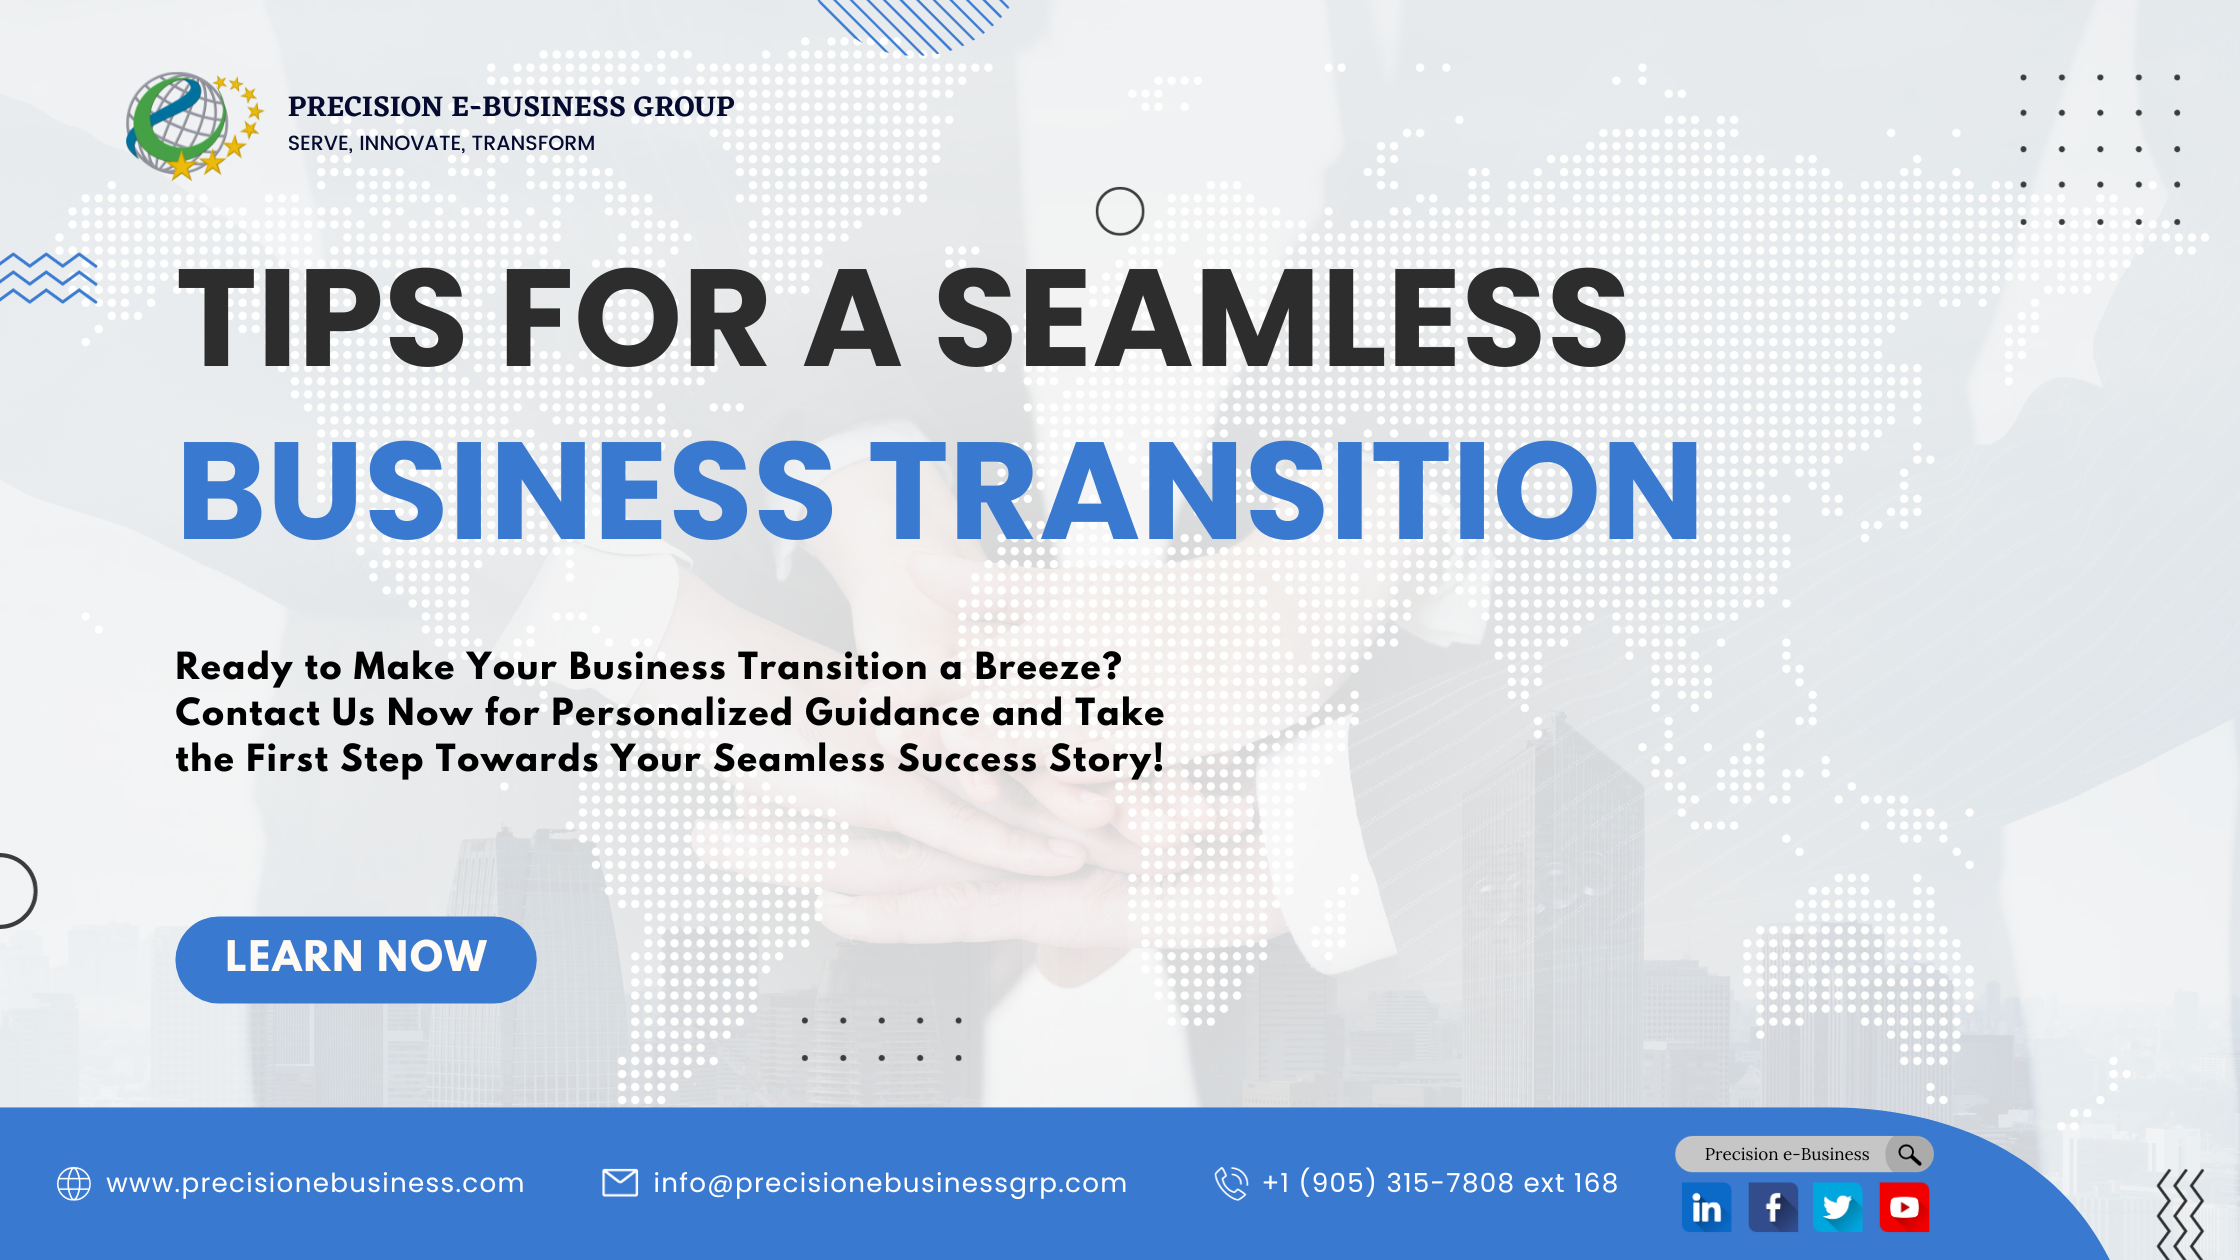 EDI Implementation Guide: Tips for a Seamless Business Transition